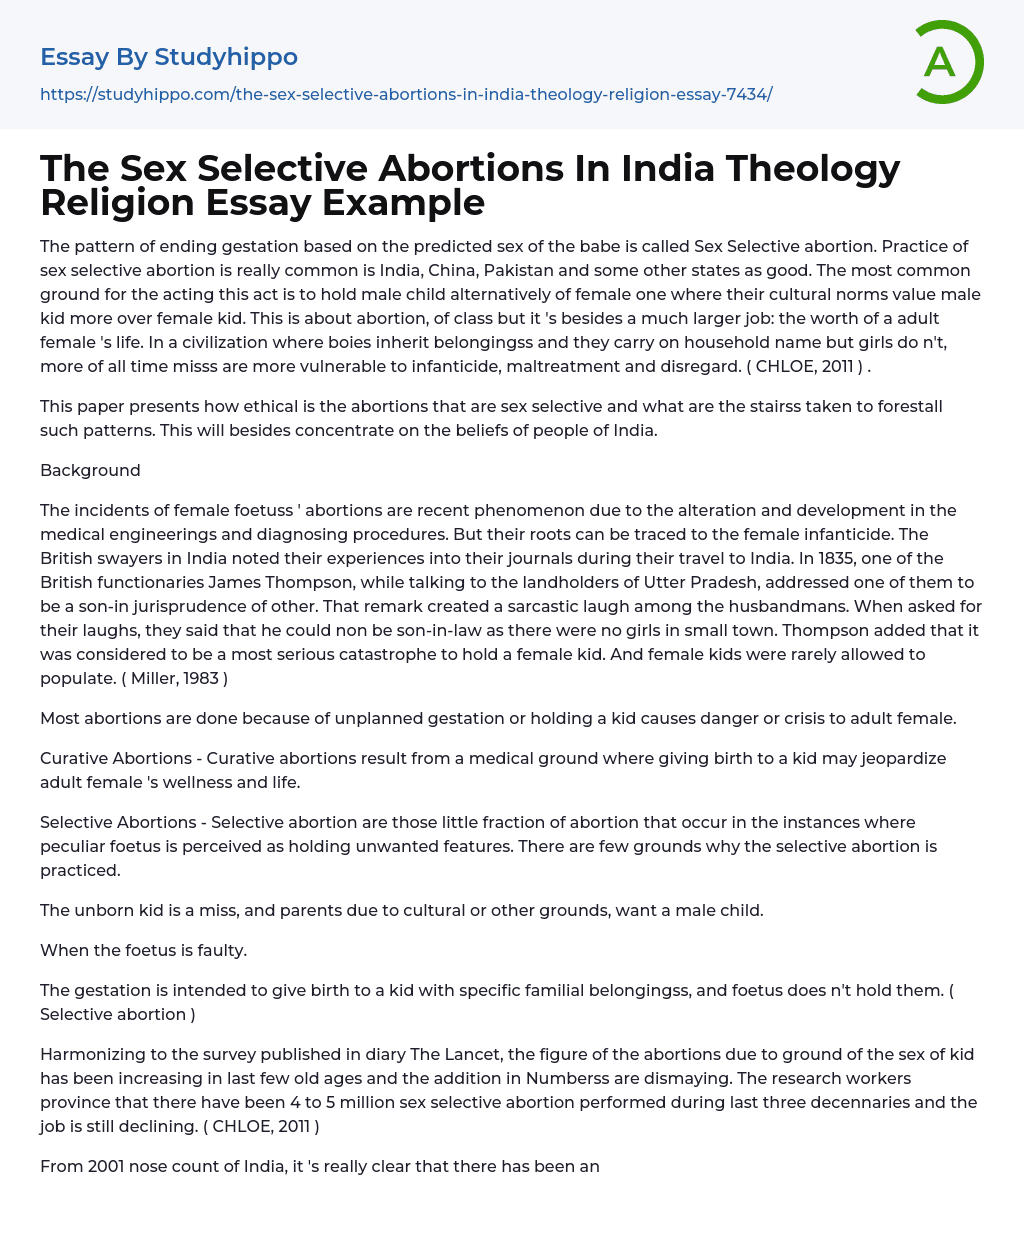 The Sex Selective Abortions In India Theology Religion Essay Example